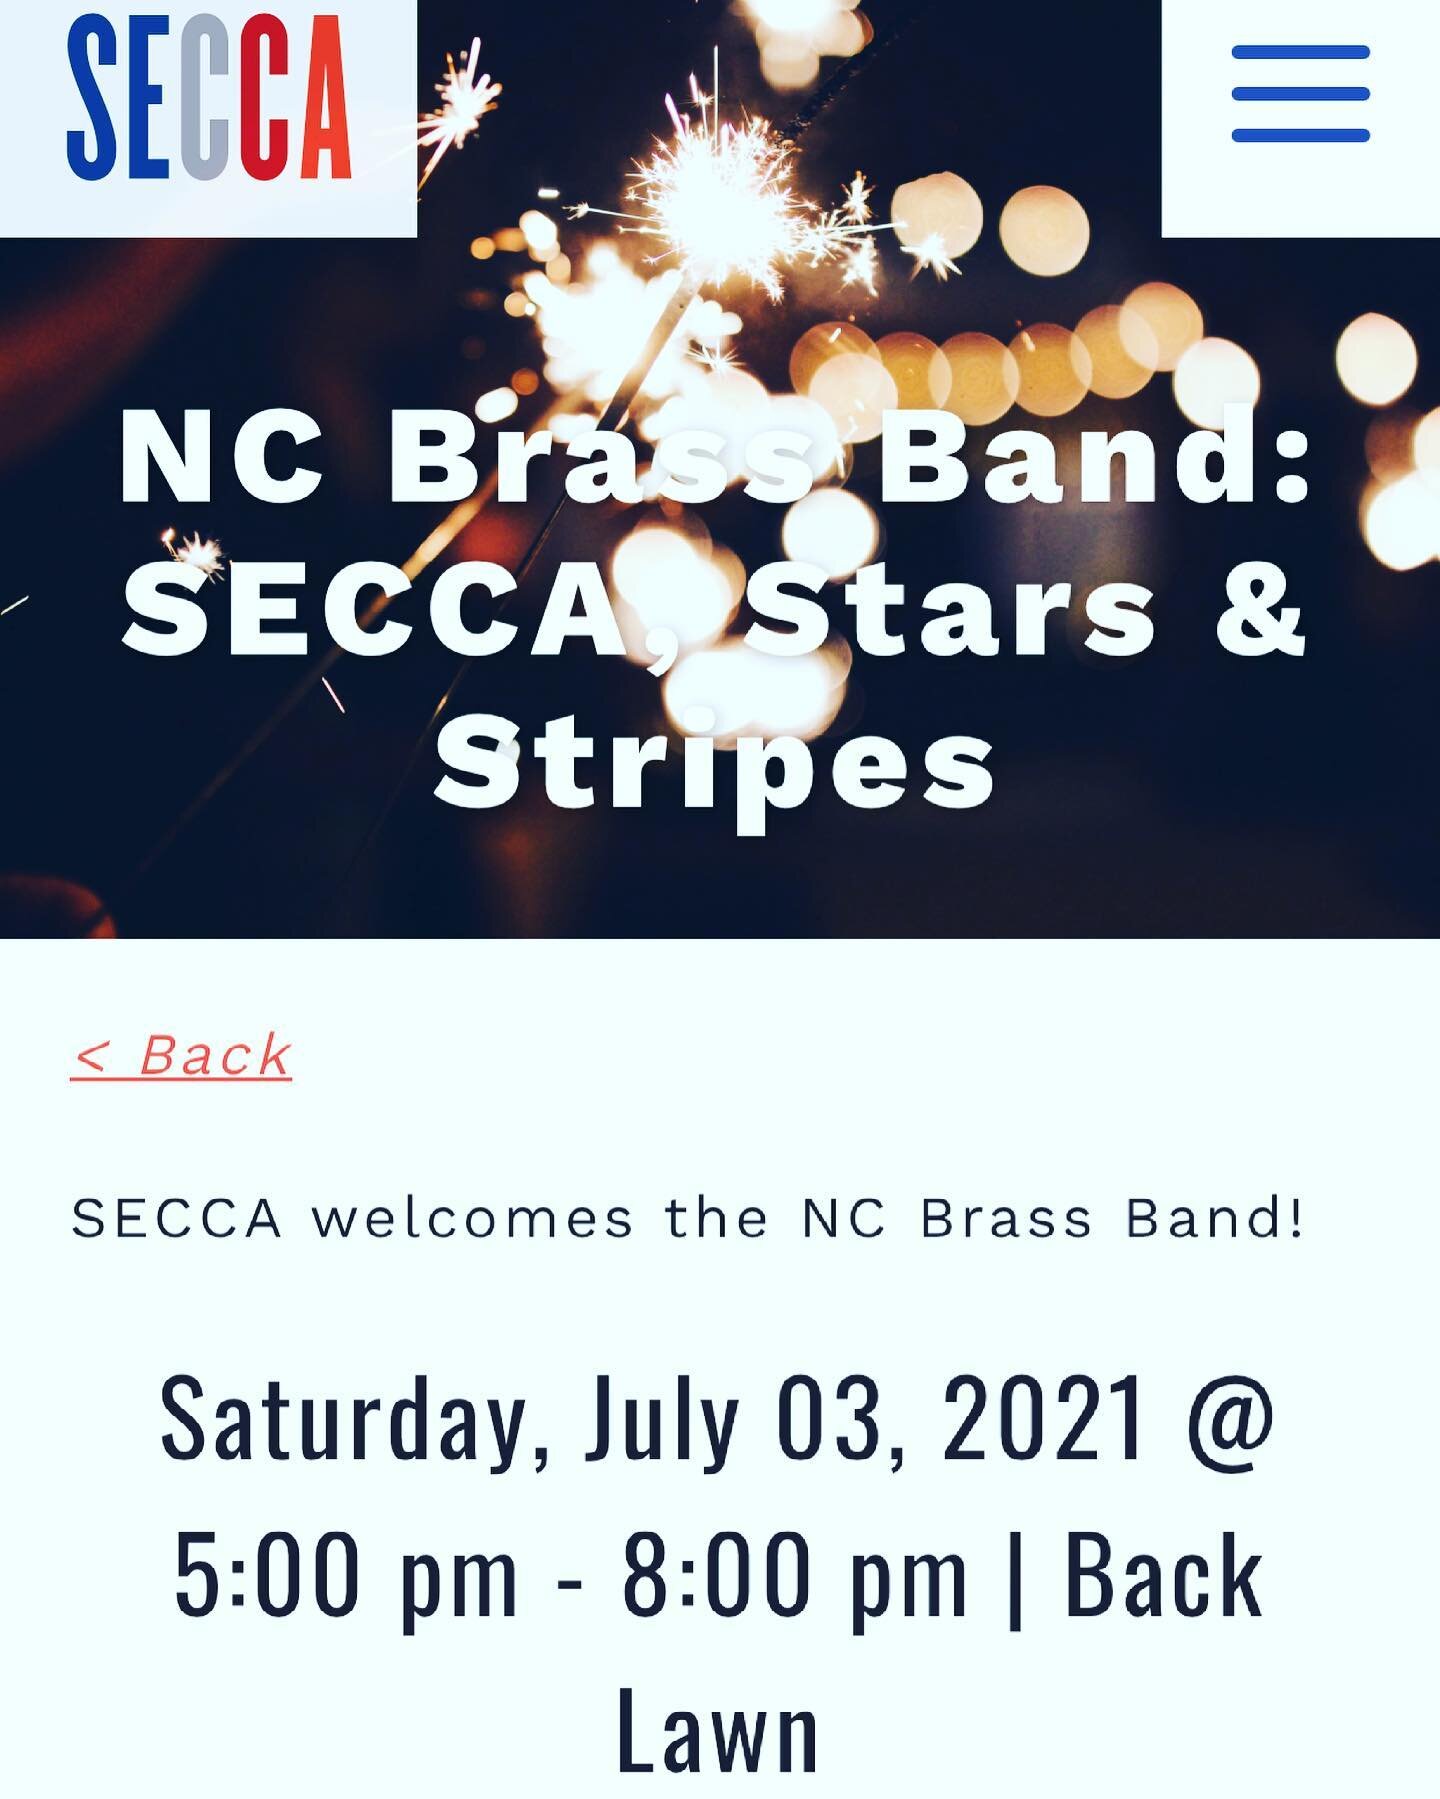 Hey, Y&rsquo;all! Celebrate the 4th tonight @seccacontempart from 5pm-8pm! We will be slingin&rsquo; sauce and cutting a rug! See y&rsquo;all then! #secca #fourthofjuly #sharethesouth #yallcompany